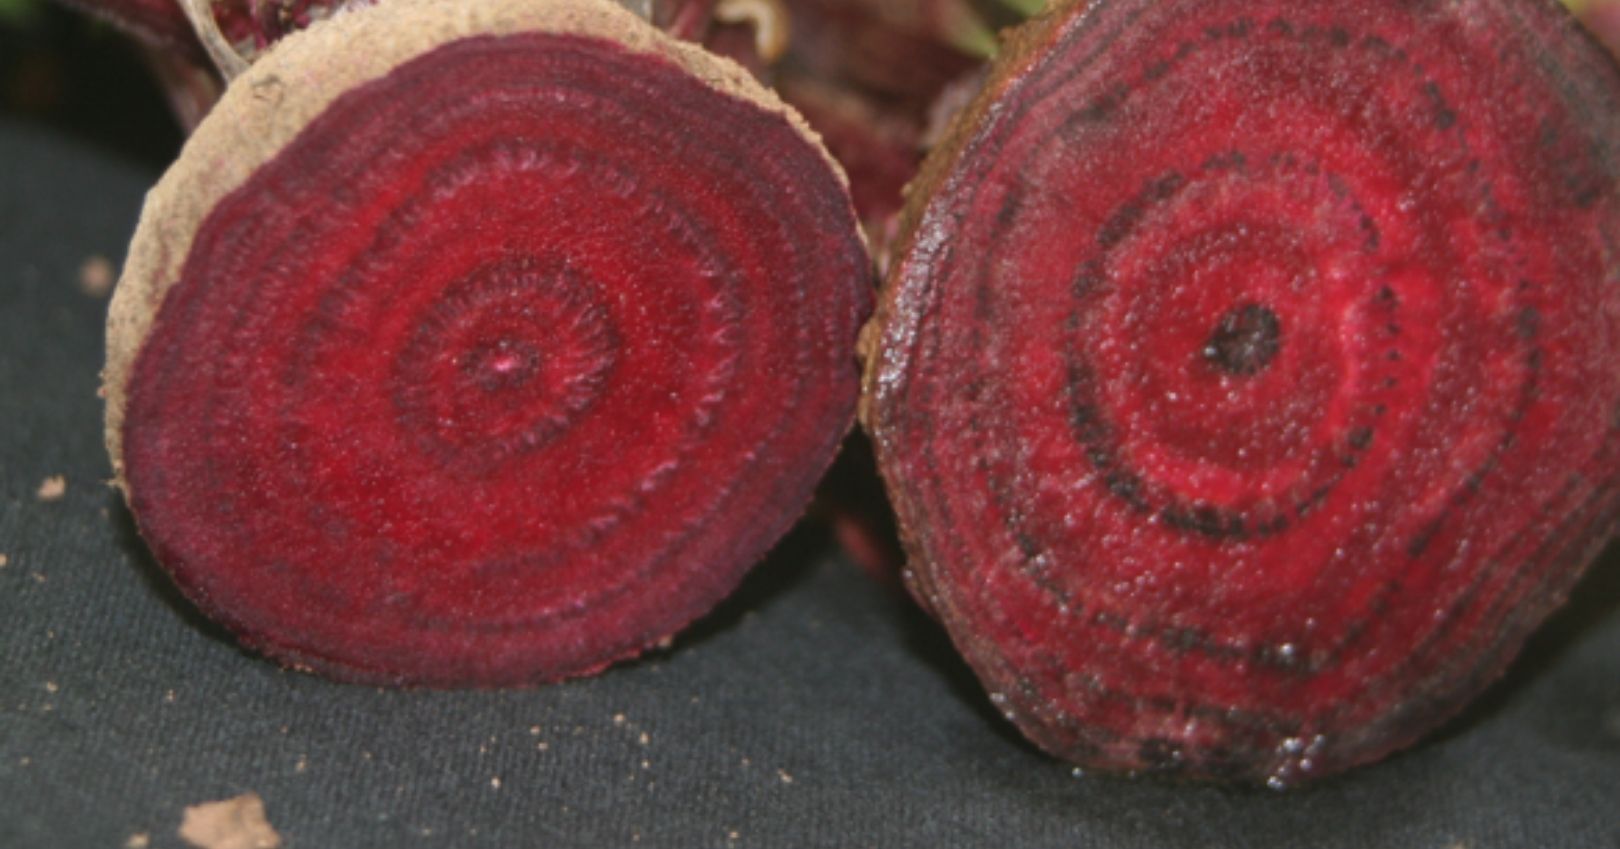 Vascular Discoloration in Beets due to Beet Curly Top Virus